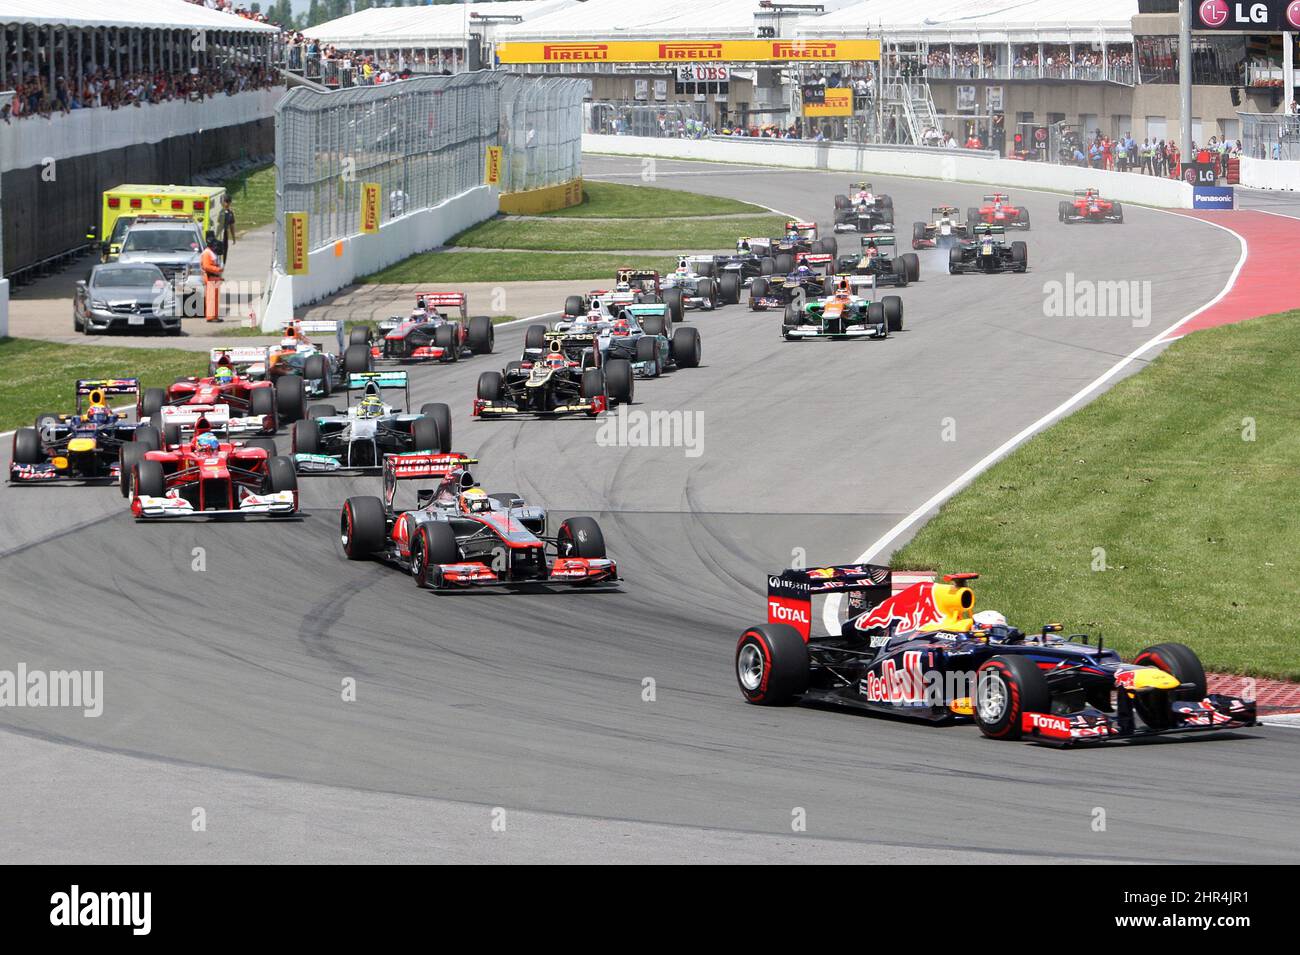 Red Bull Racing driver Sebastian Vettel, from Germany, leads the pack into the first turn at the start of Formula One's Montreal Grand Prix auto race on Sunday, June 10, 2012. (AP Photo/The Canadian Press, Ryan Remiorz) Stock Photo